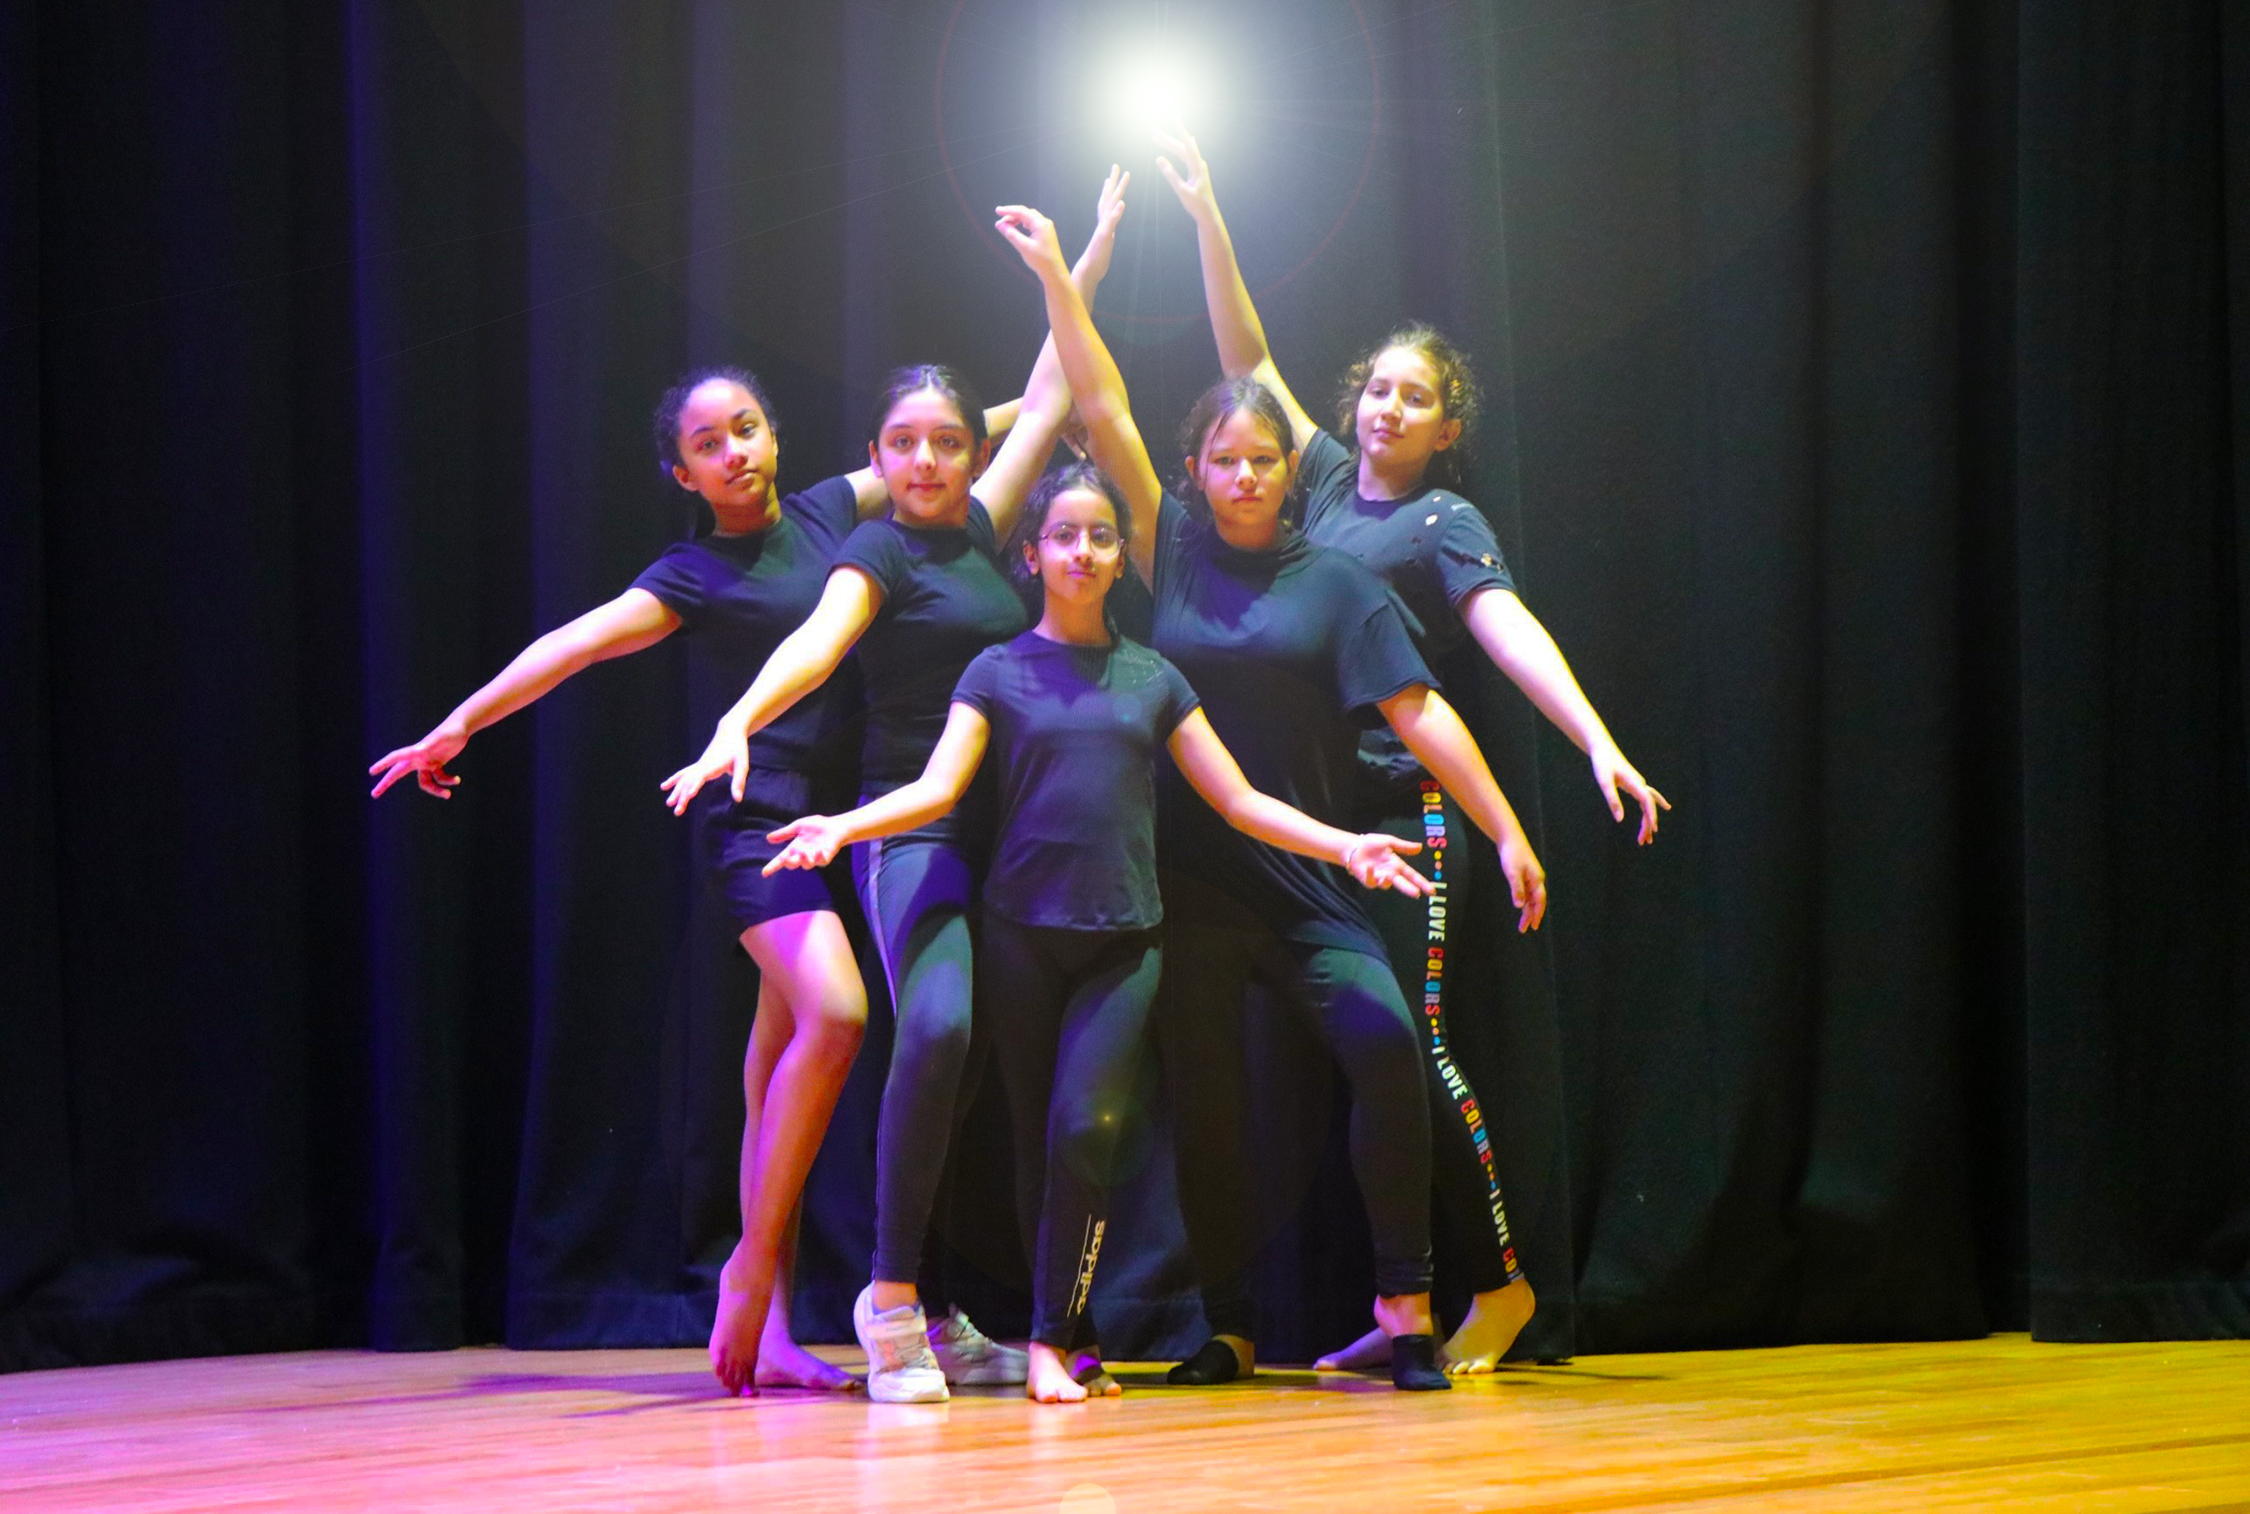 Drama and the Performing Arts as a core part of cultural life at Amity International School in Abu Dhabi